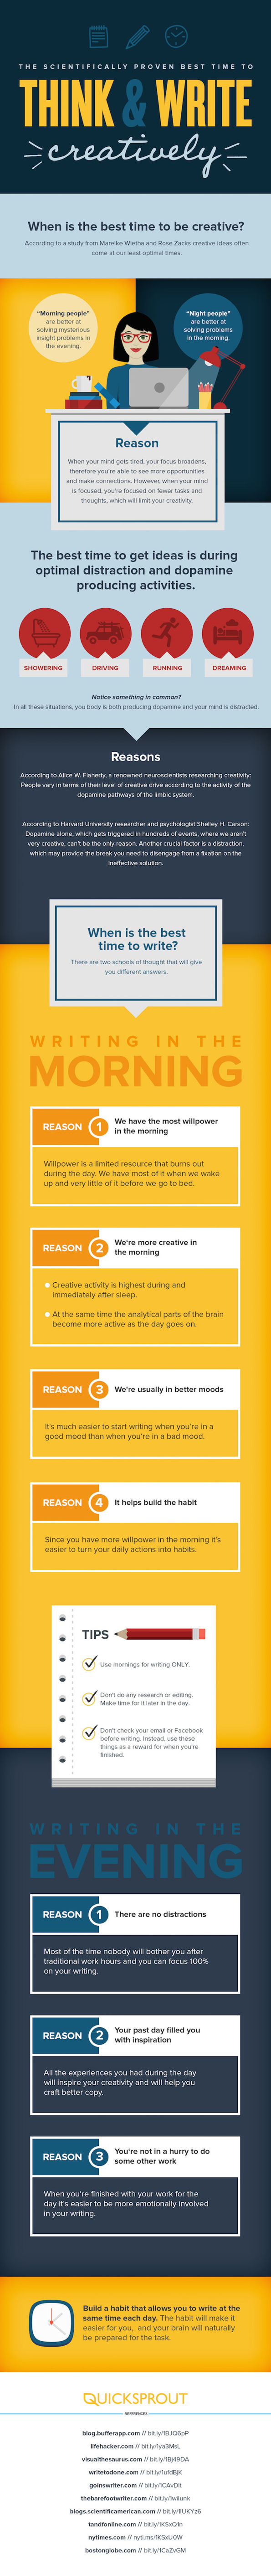 When is the Best Time to Be Creative? Infographic image